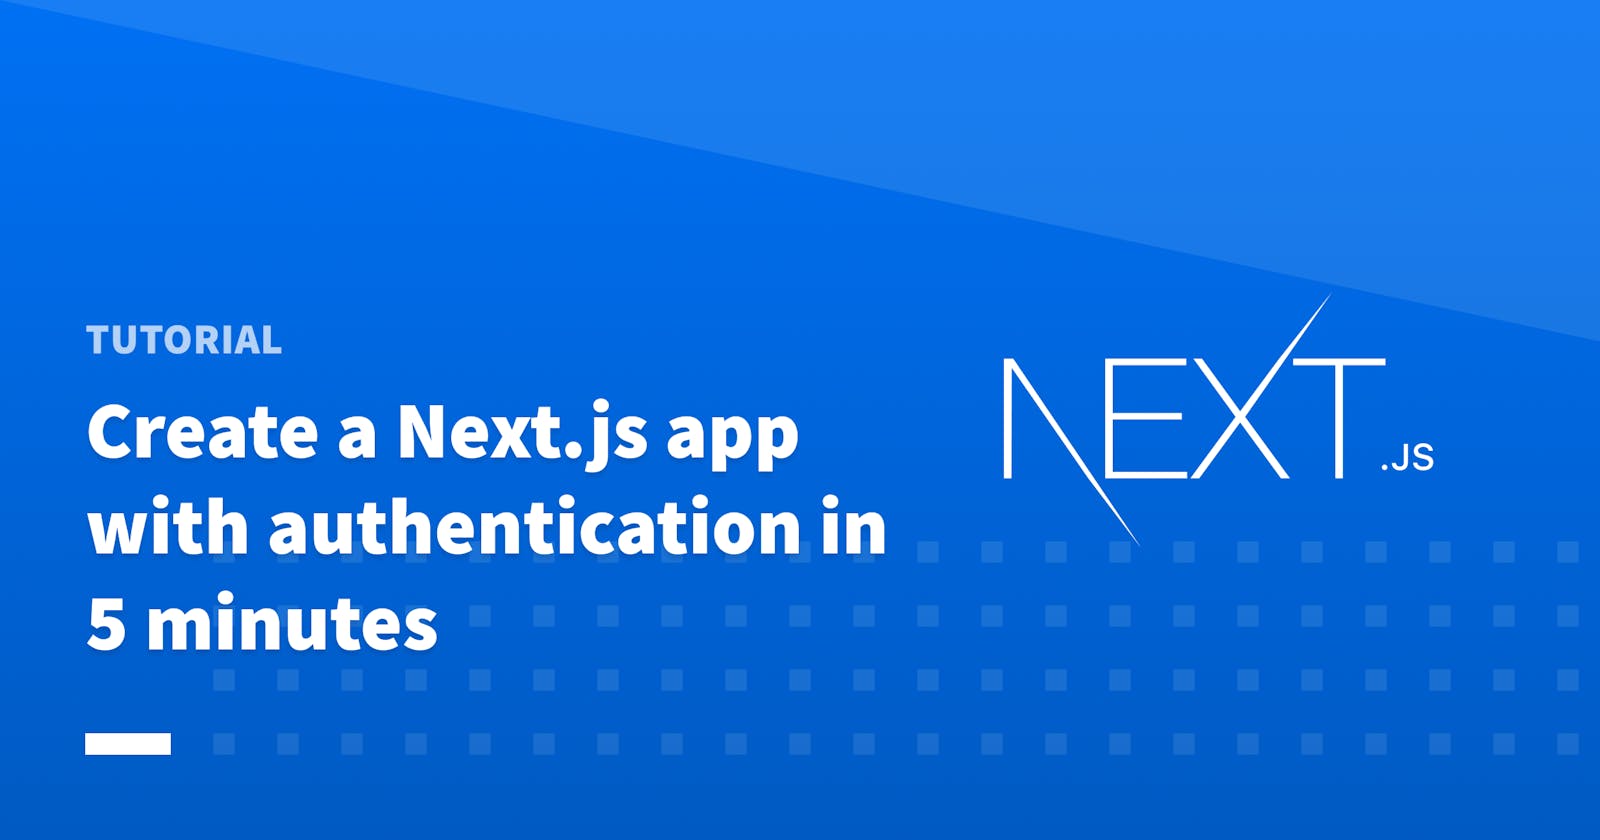 Create a Next.js app with authentication in 5 minutes